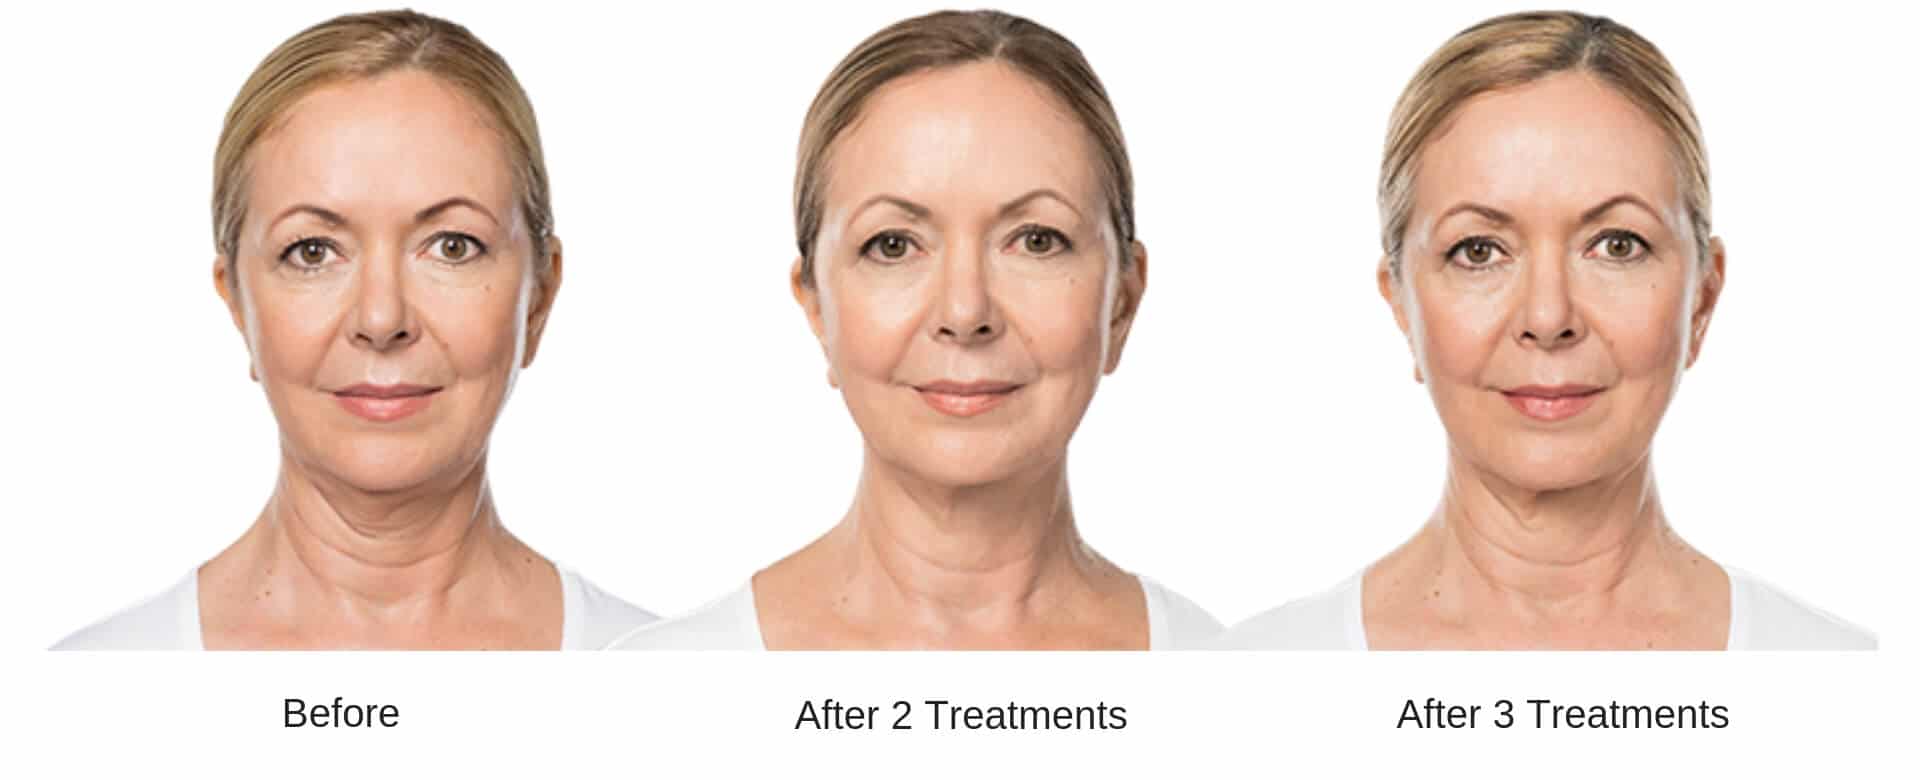 Womans before and after 6 treatment results from Kybella.